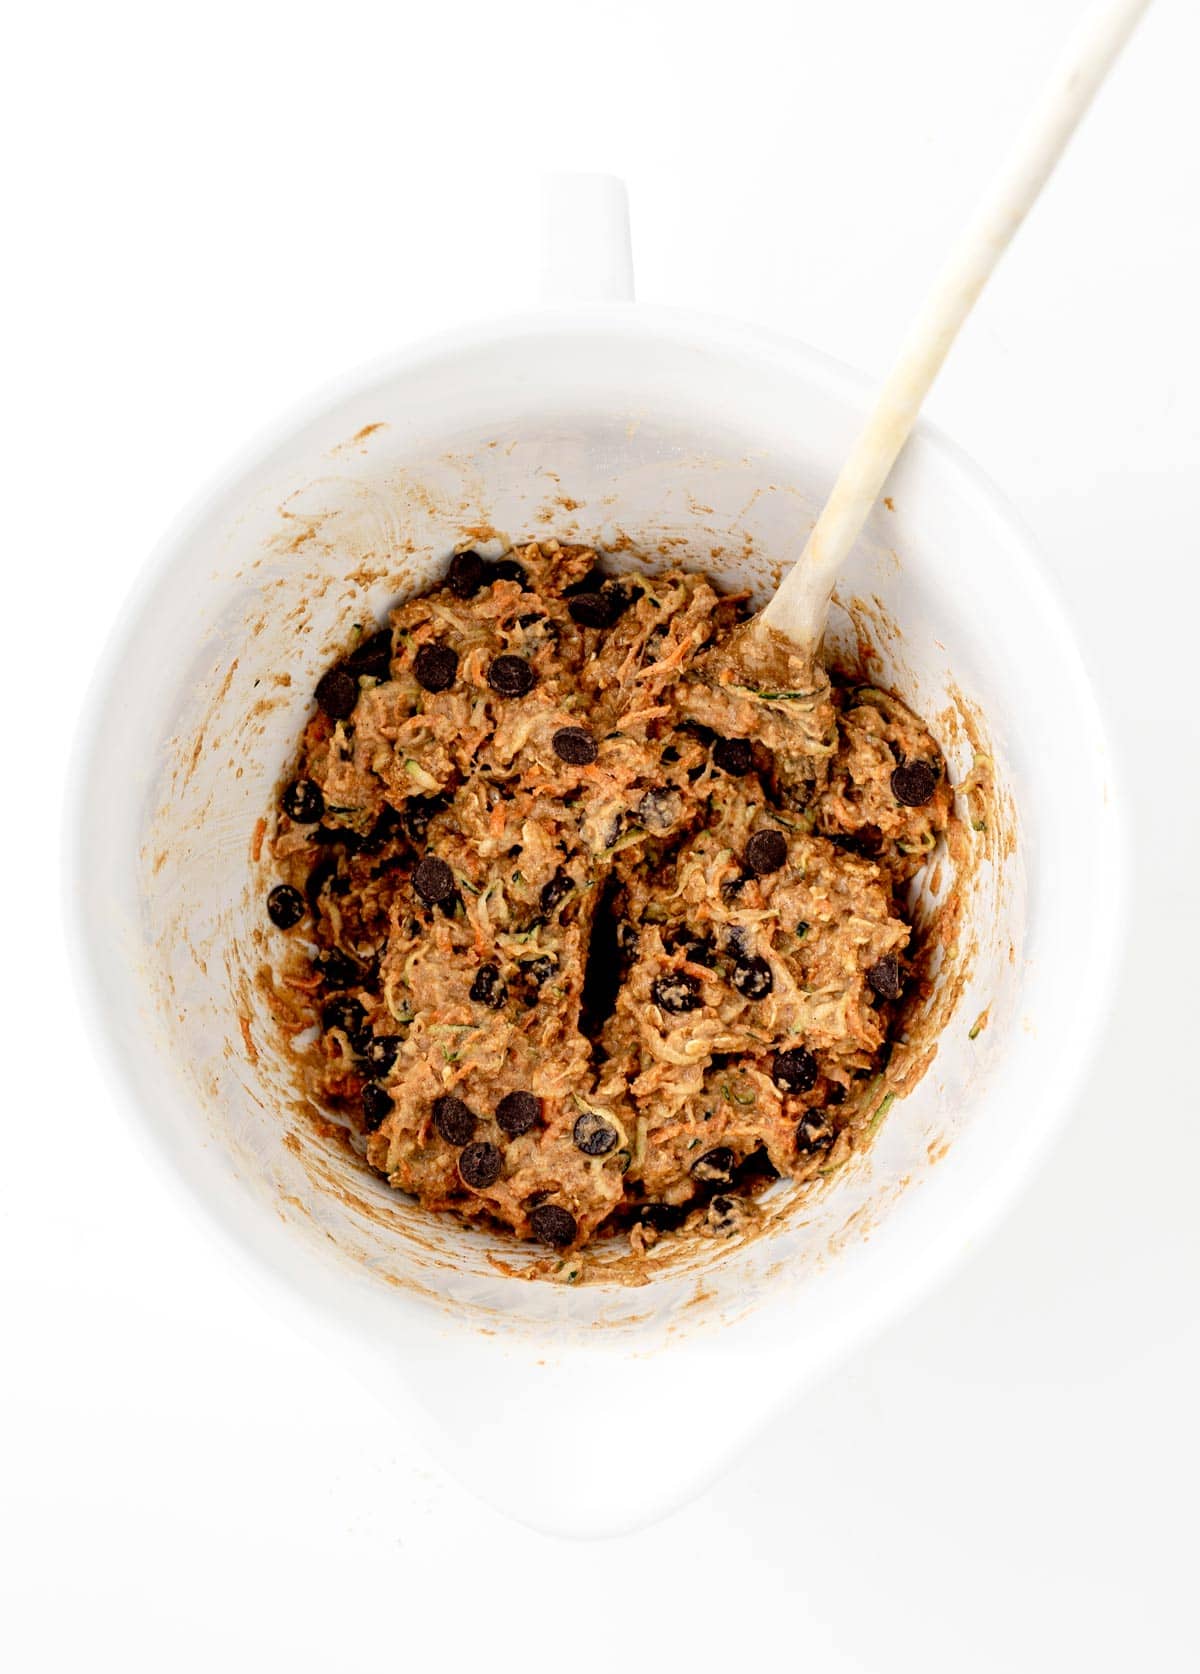 Combining the chocolate chips in with the hidden veggie cookie dough in a mixing bowl with a wooden spoon.